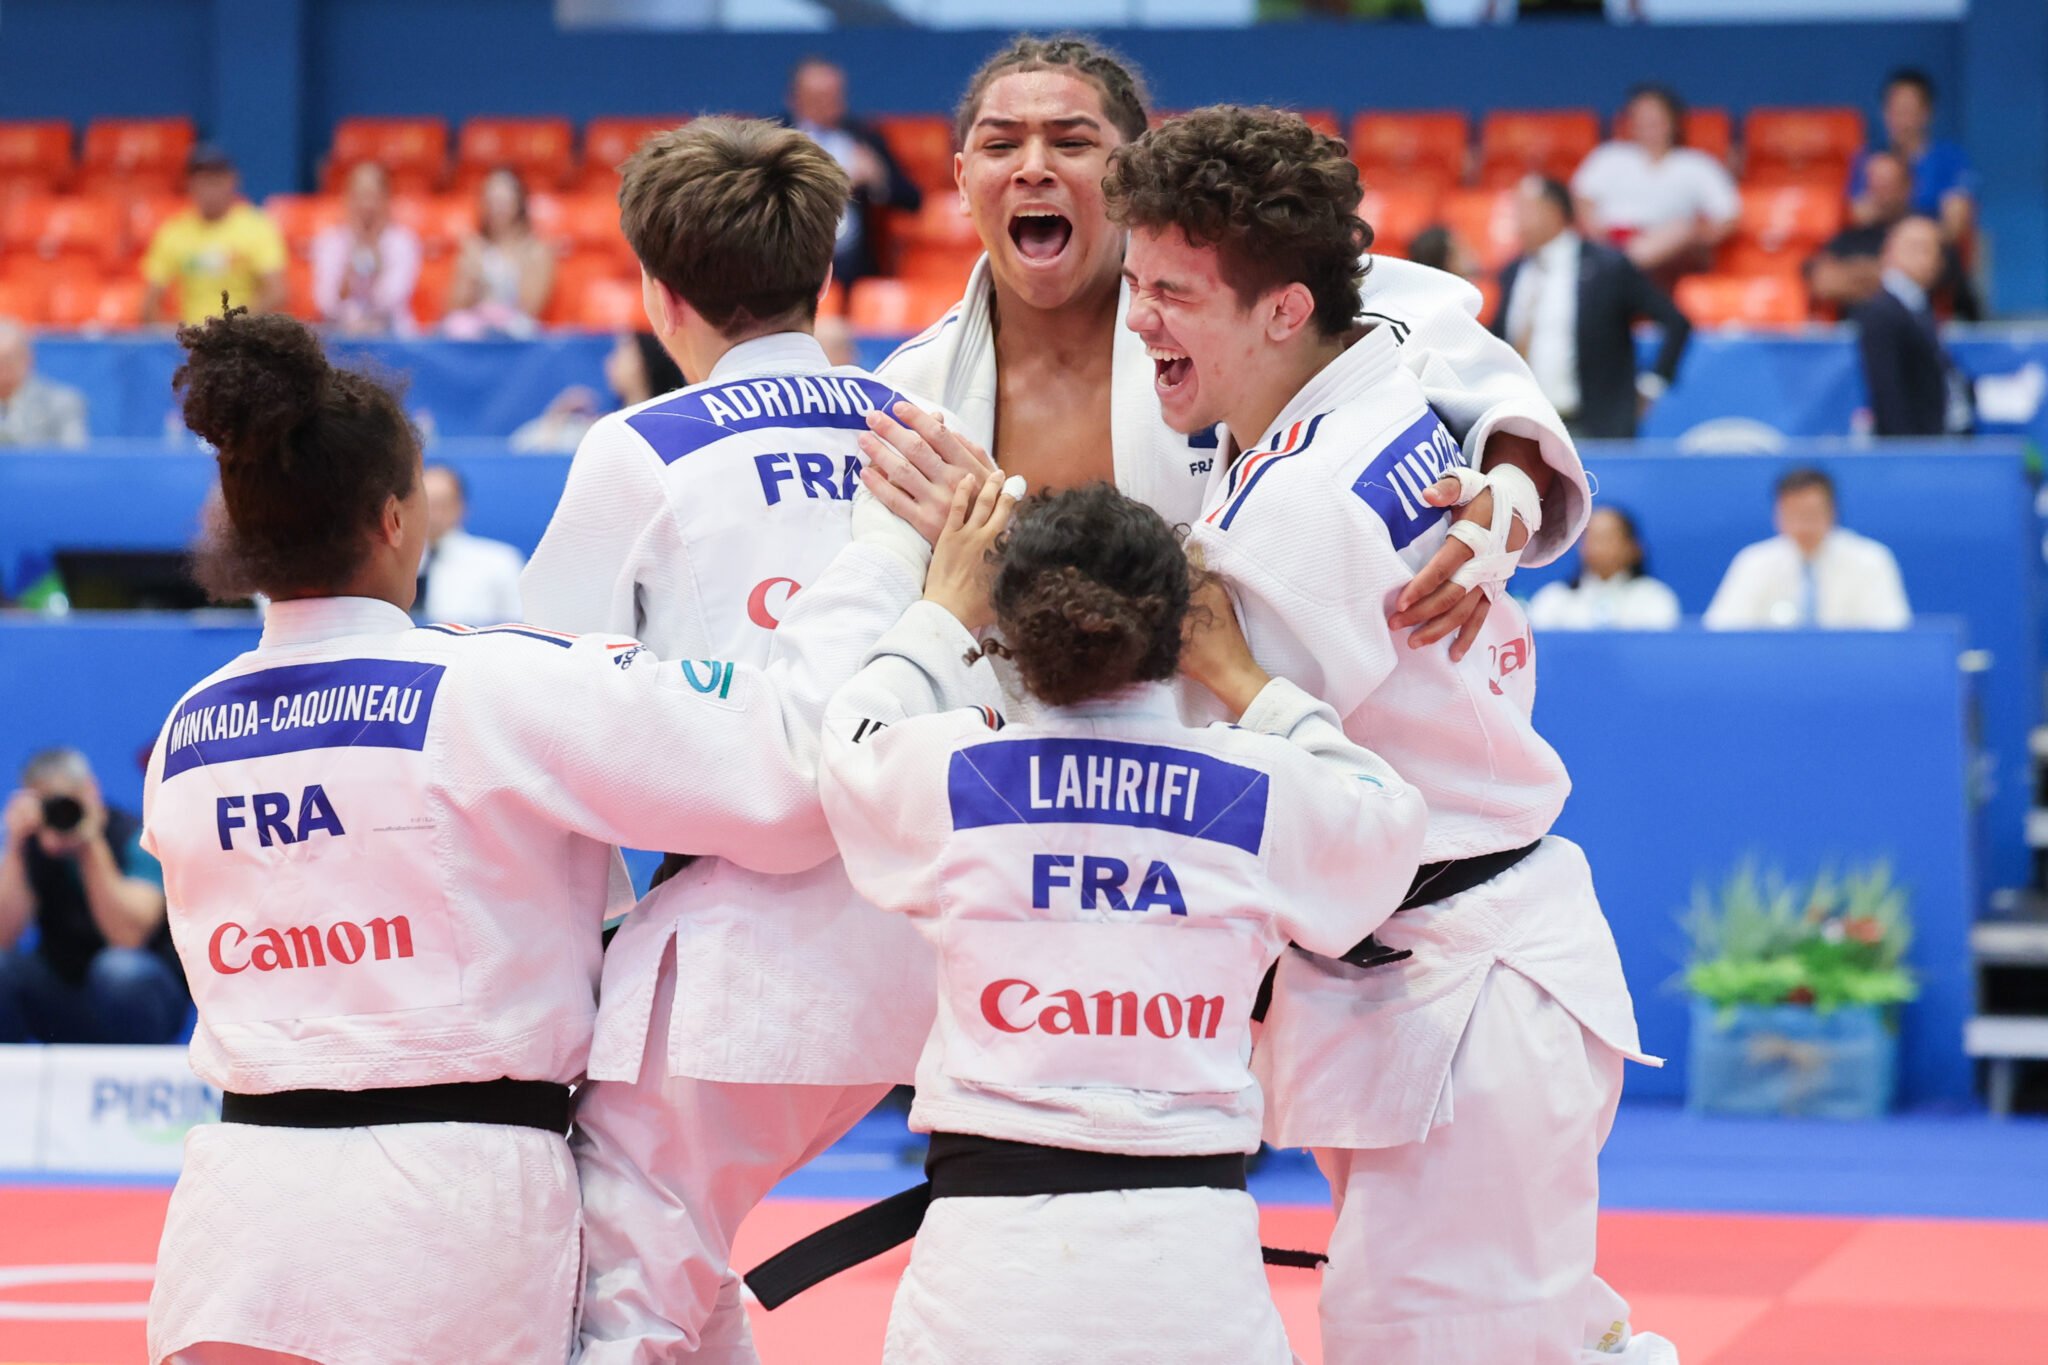 CADET MIXED TEAM TITLE GOES TO FRANCE